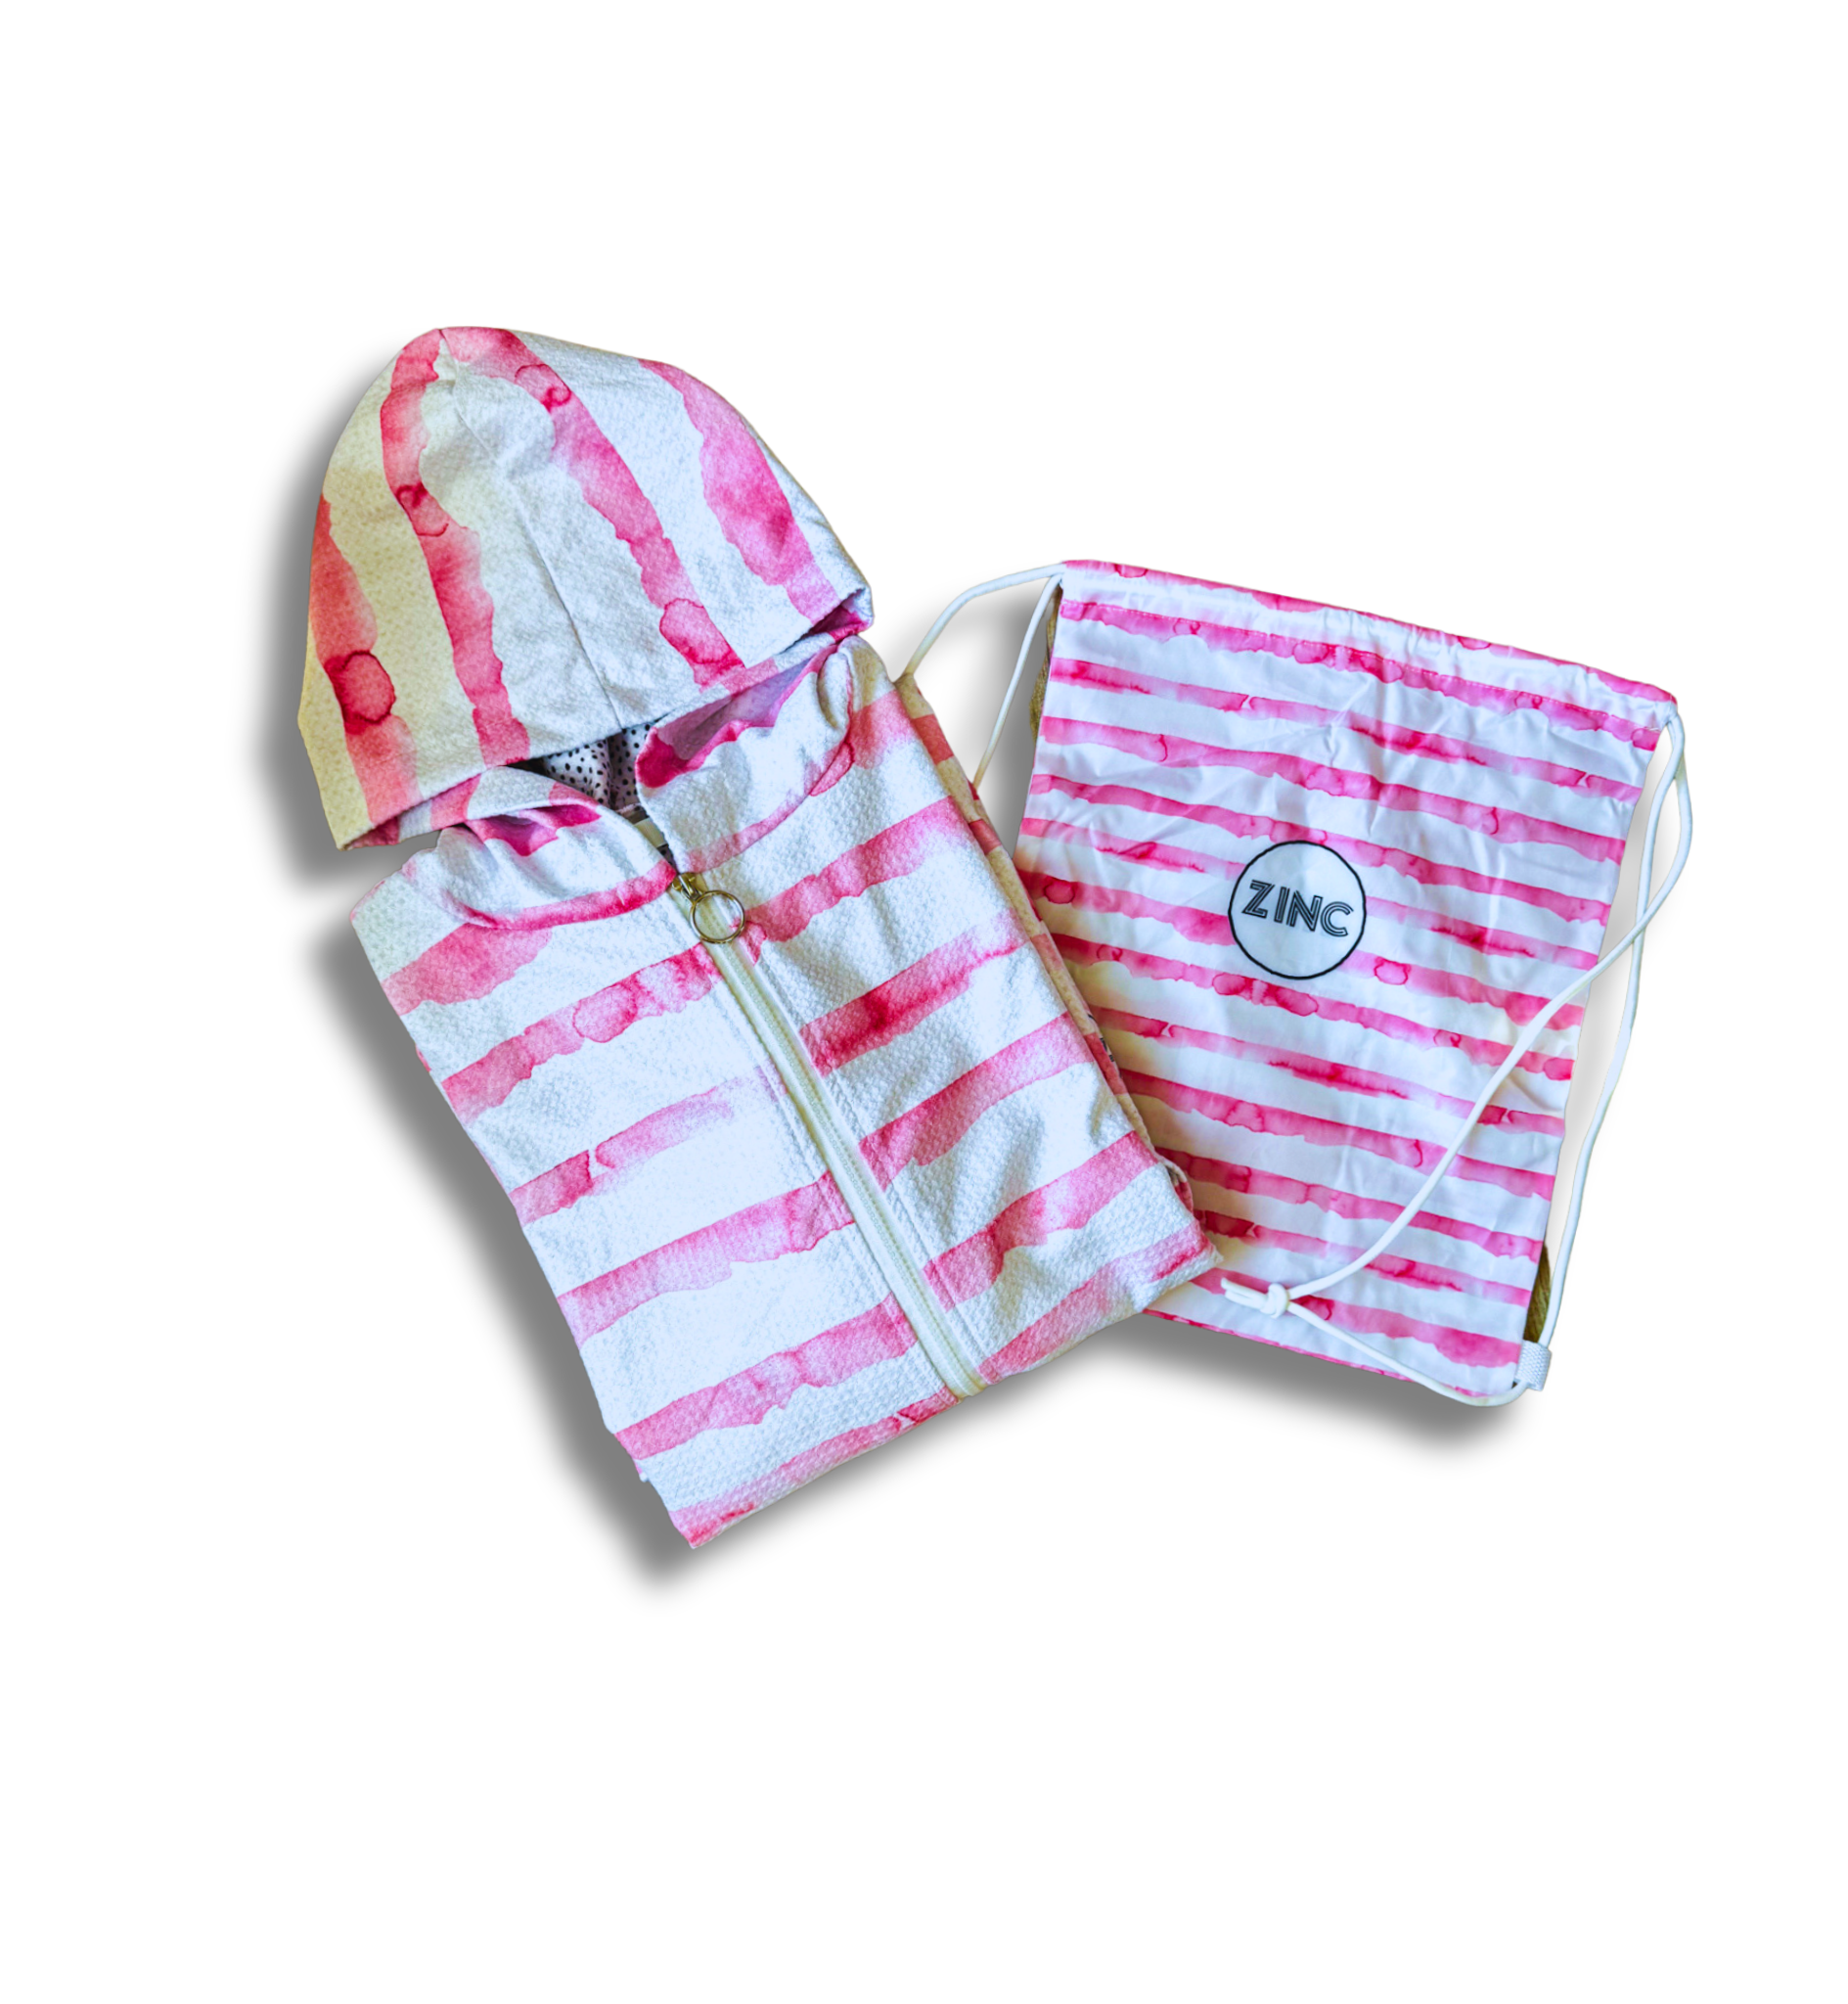 Large ZIP UP Hooded Towel - French Beach Pink *PRE-ORDER DUE END MAY/JUNE*